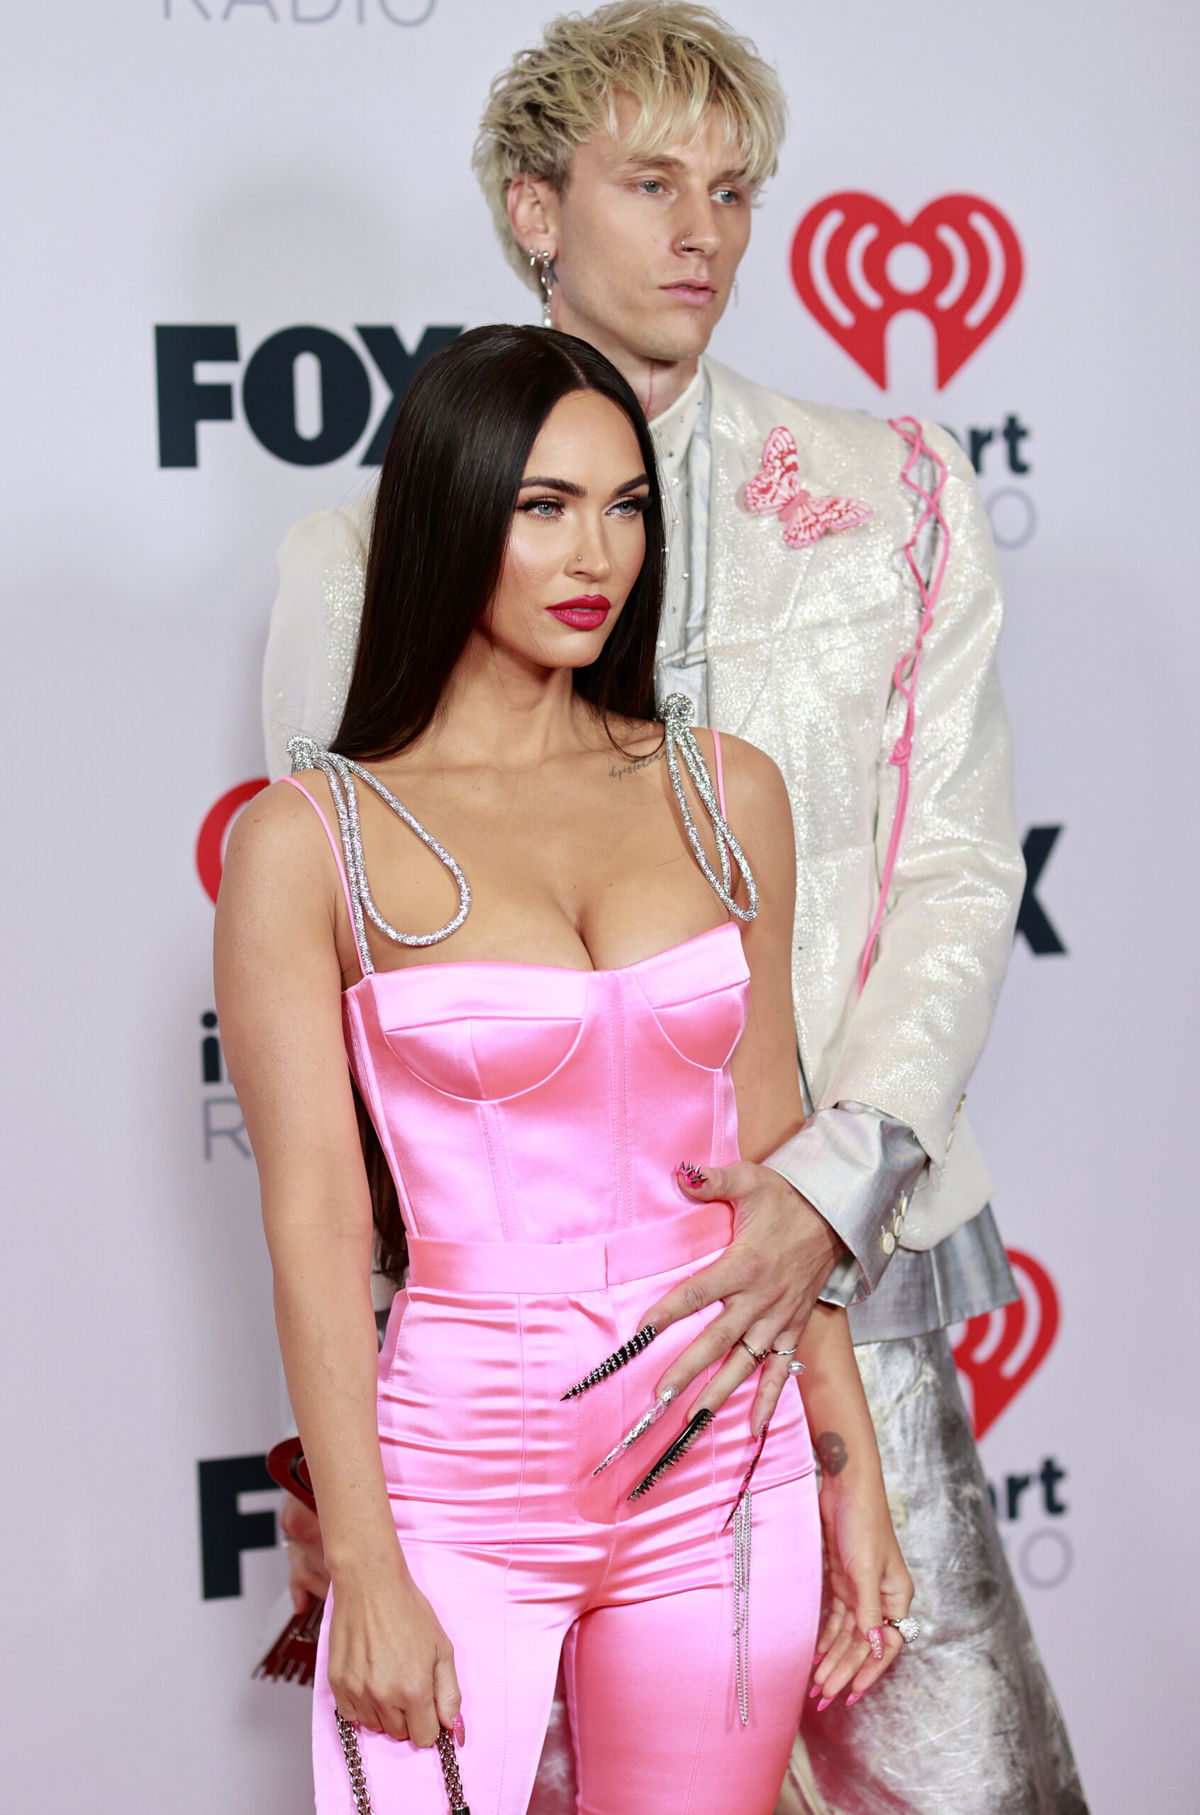 <i>Emma McIntyre/Getty Images North America/Getty Images for iHeartMedia</i><br/>Megan Fox and Machine Gun Kelly